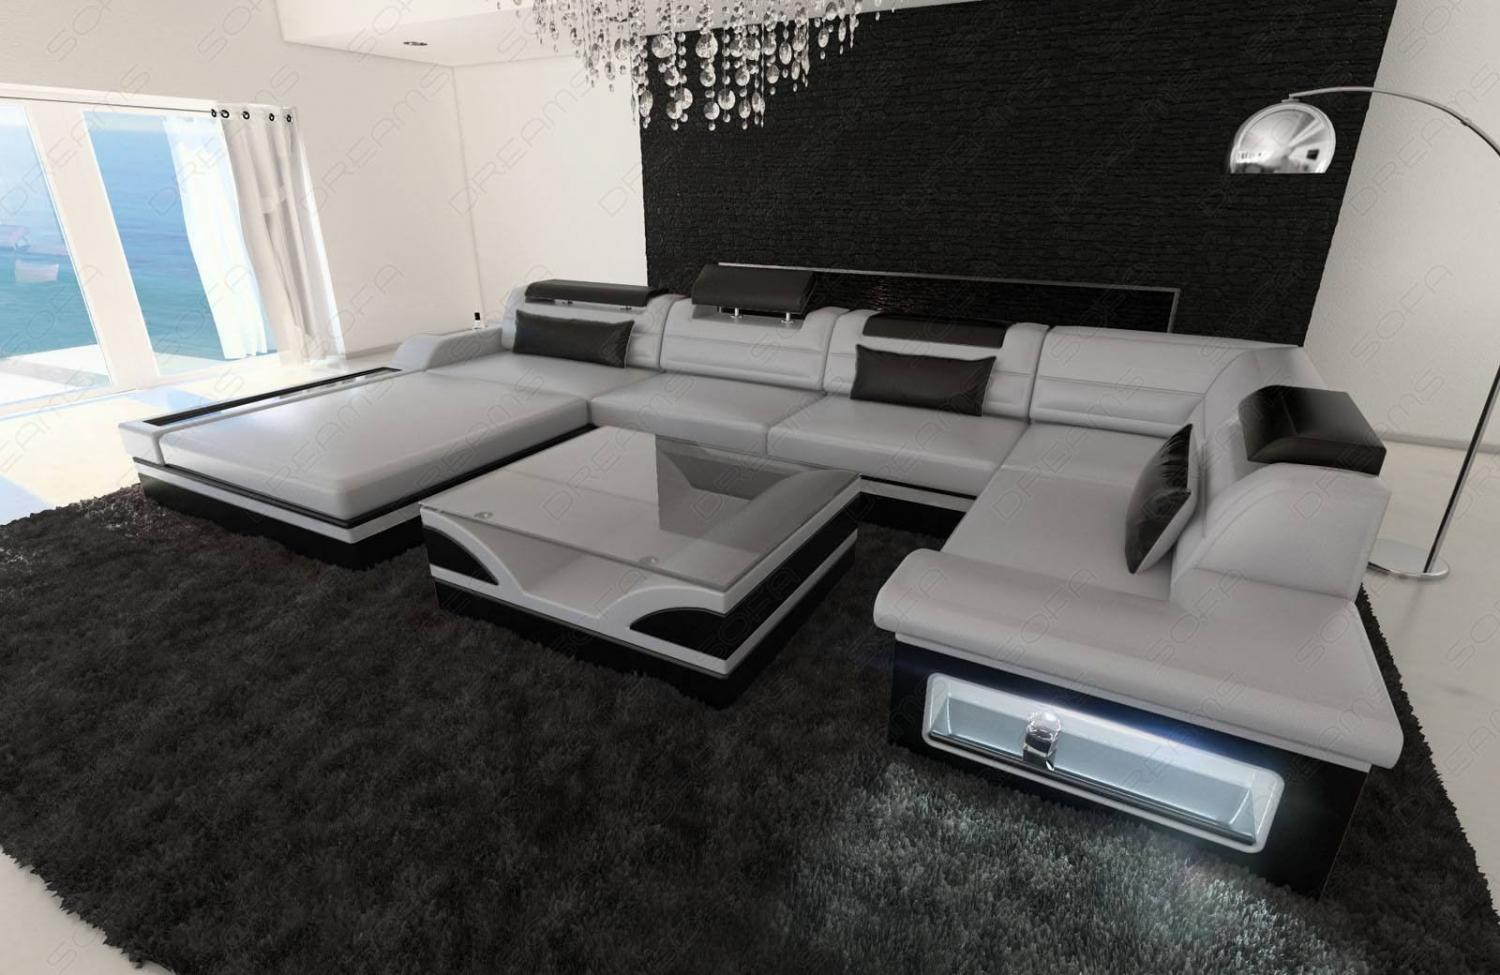 Ultimate Sectional Sofa - Futuristic Modern Sectional Leather Couch By SofaDreams - Giant Luxury Sectional Sofa